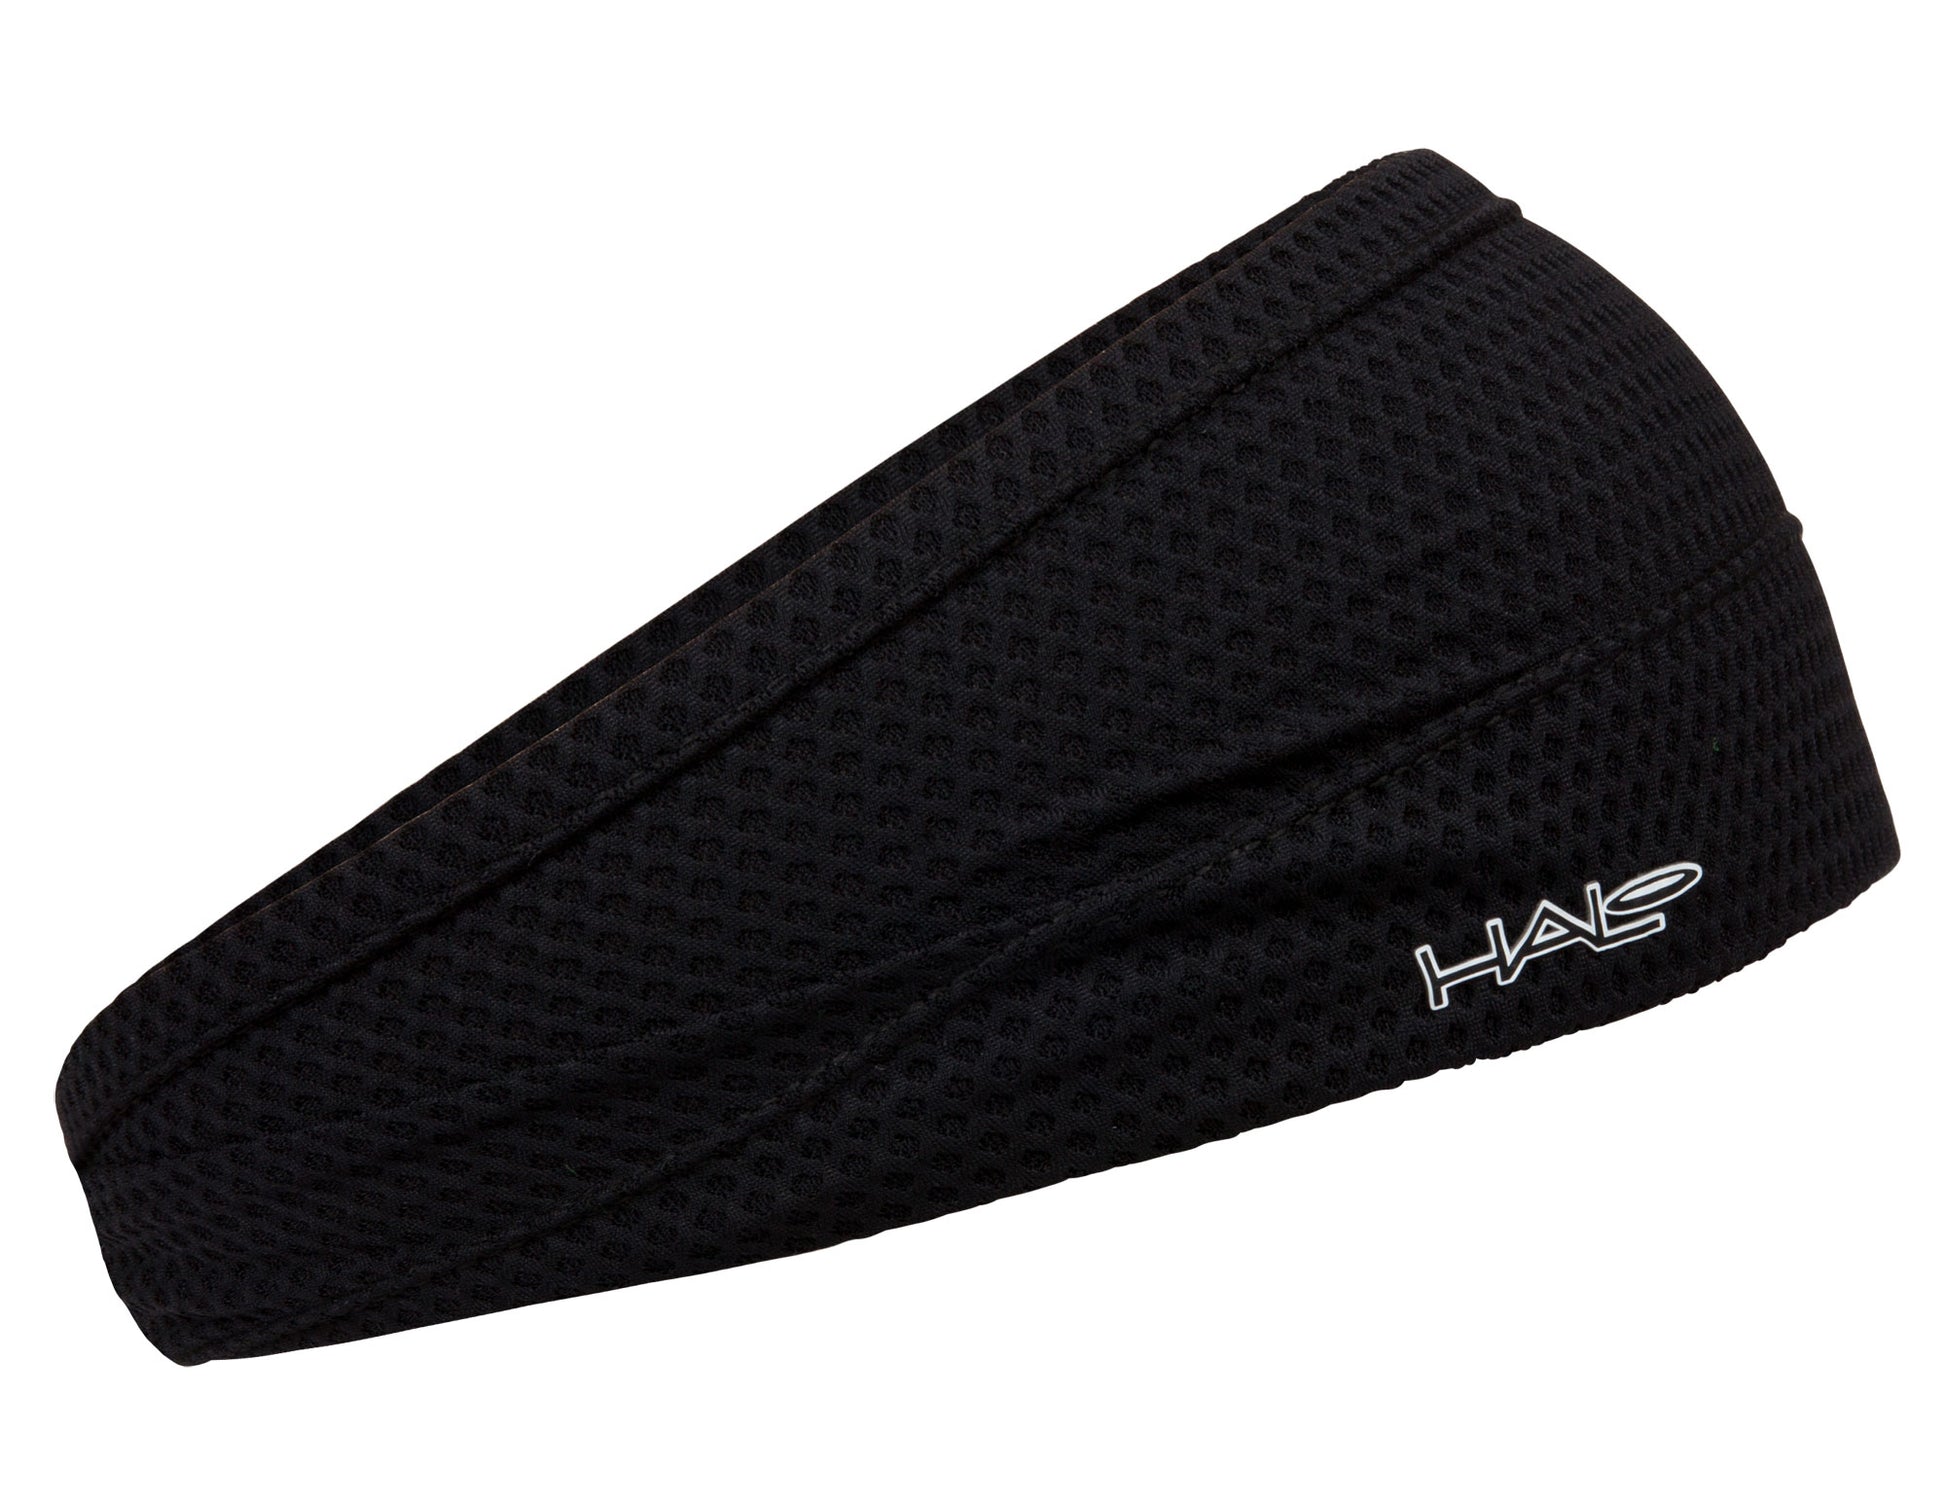 Halo Bandit pullover headband, side view in Black Air.